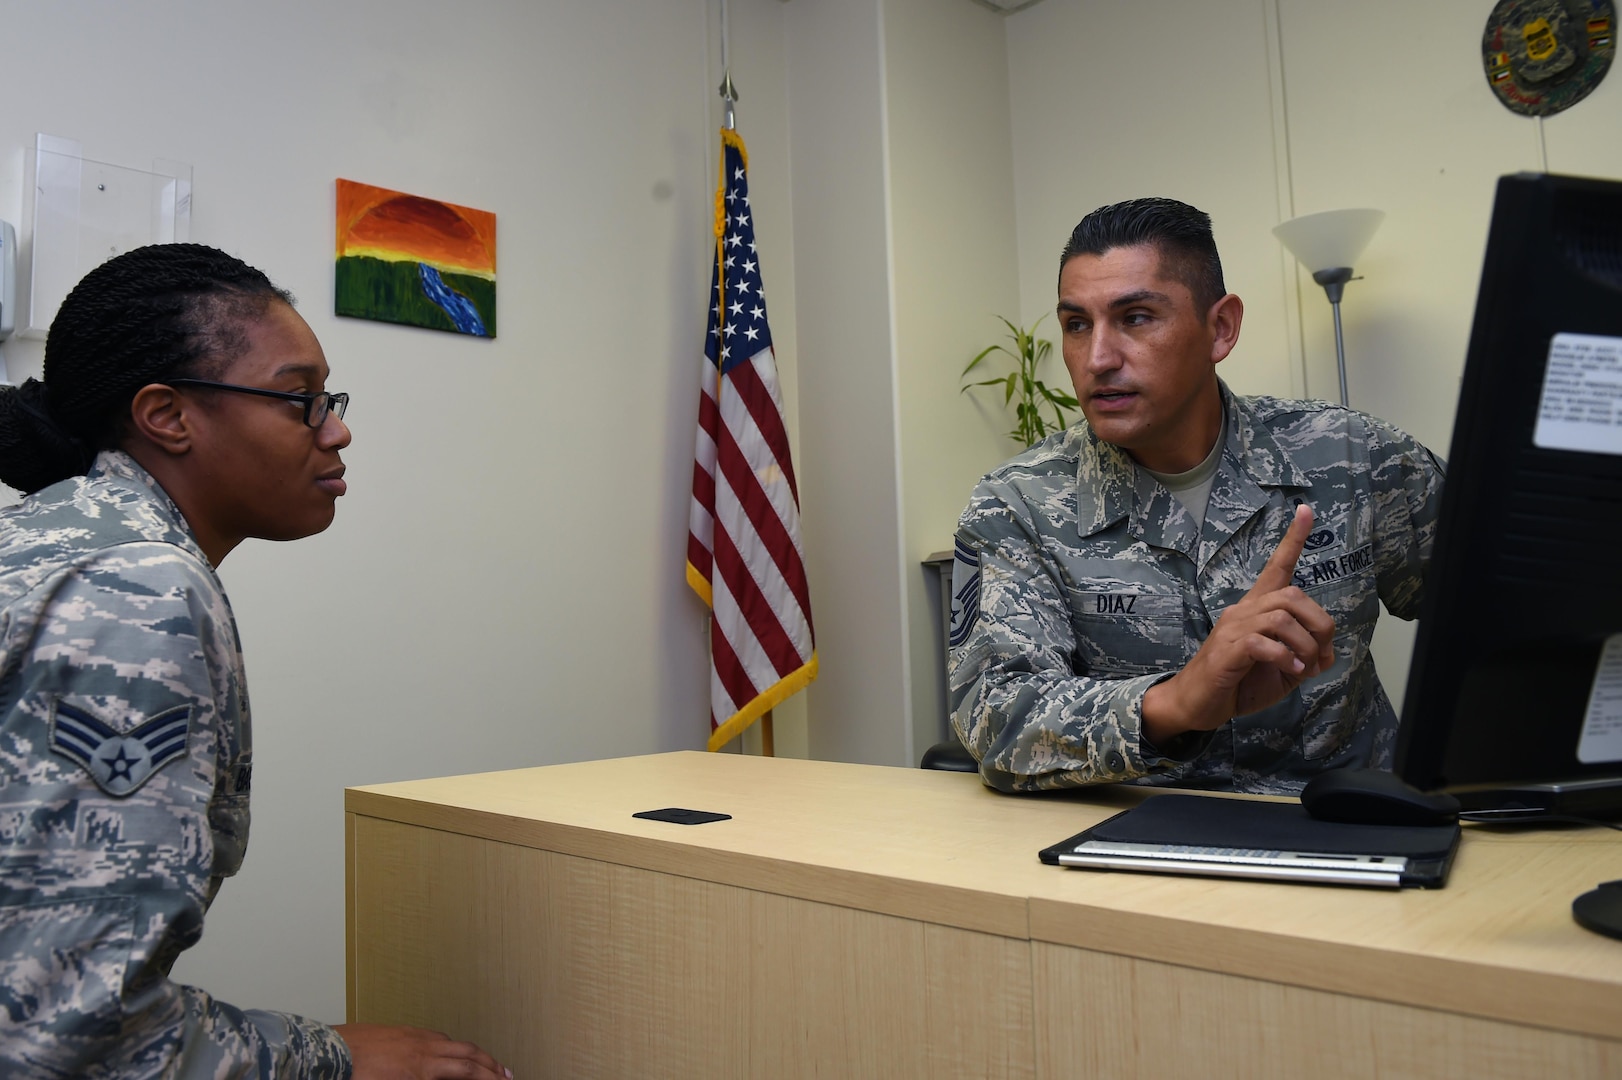 Senior Master Sgt. Jose Diaz helps Senior Airman Laketa Baisden, a medical technician with the 559th Aerospace Medicine Squadron, with career advice Sept. 19 at the Wilford Hall Ambulatory Surgical Center, Joint Base San Antonio-Lackland, Texas. Diaz, who is the 59th Medical Wing career assistance advisor and one of four Joint Base San Antonio career advisors, helps Airmen by providing information on benefits and programs the Air Force has to offer. (U.S. Air Force photo/Staff Sgt. Jason Huddleston)